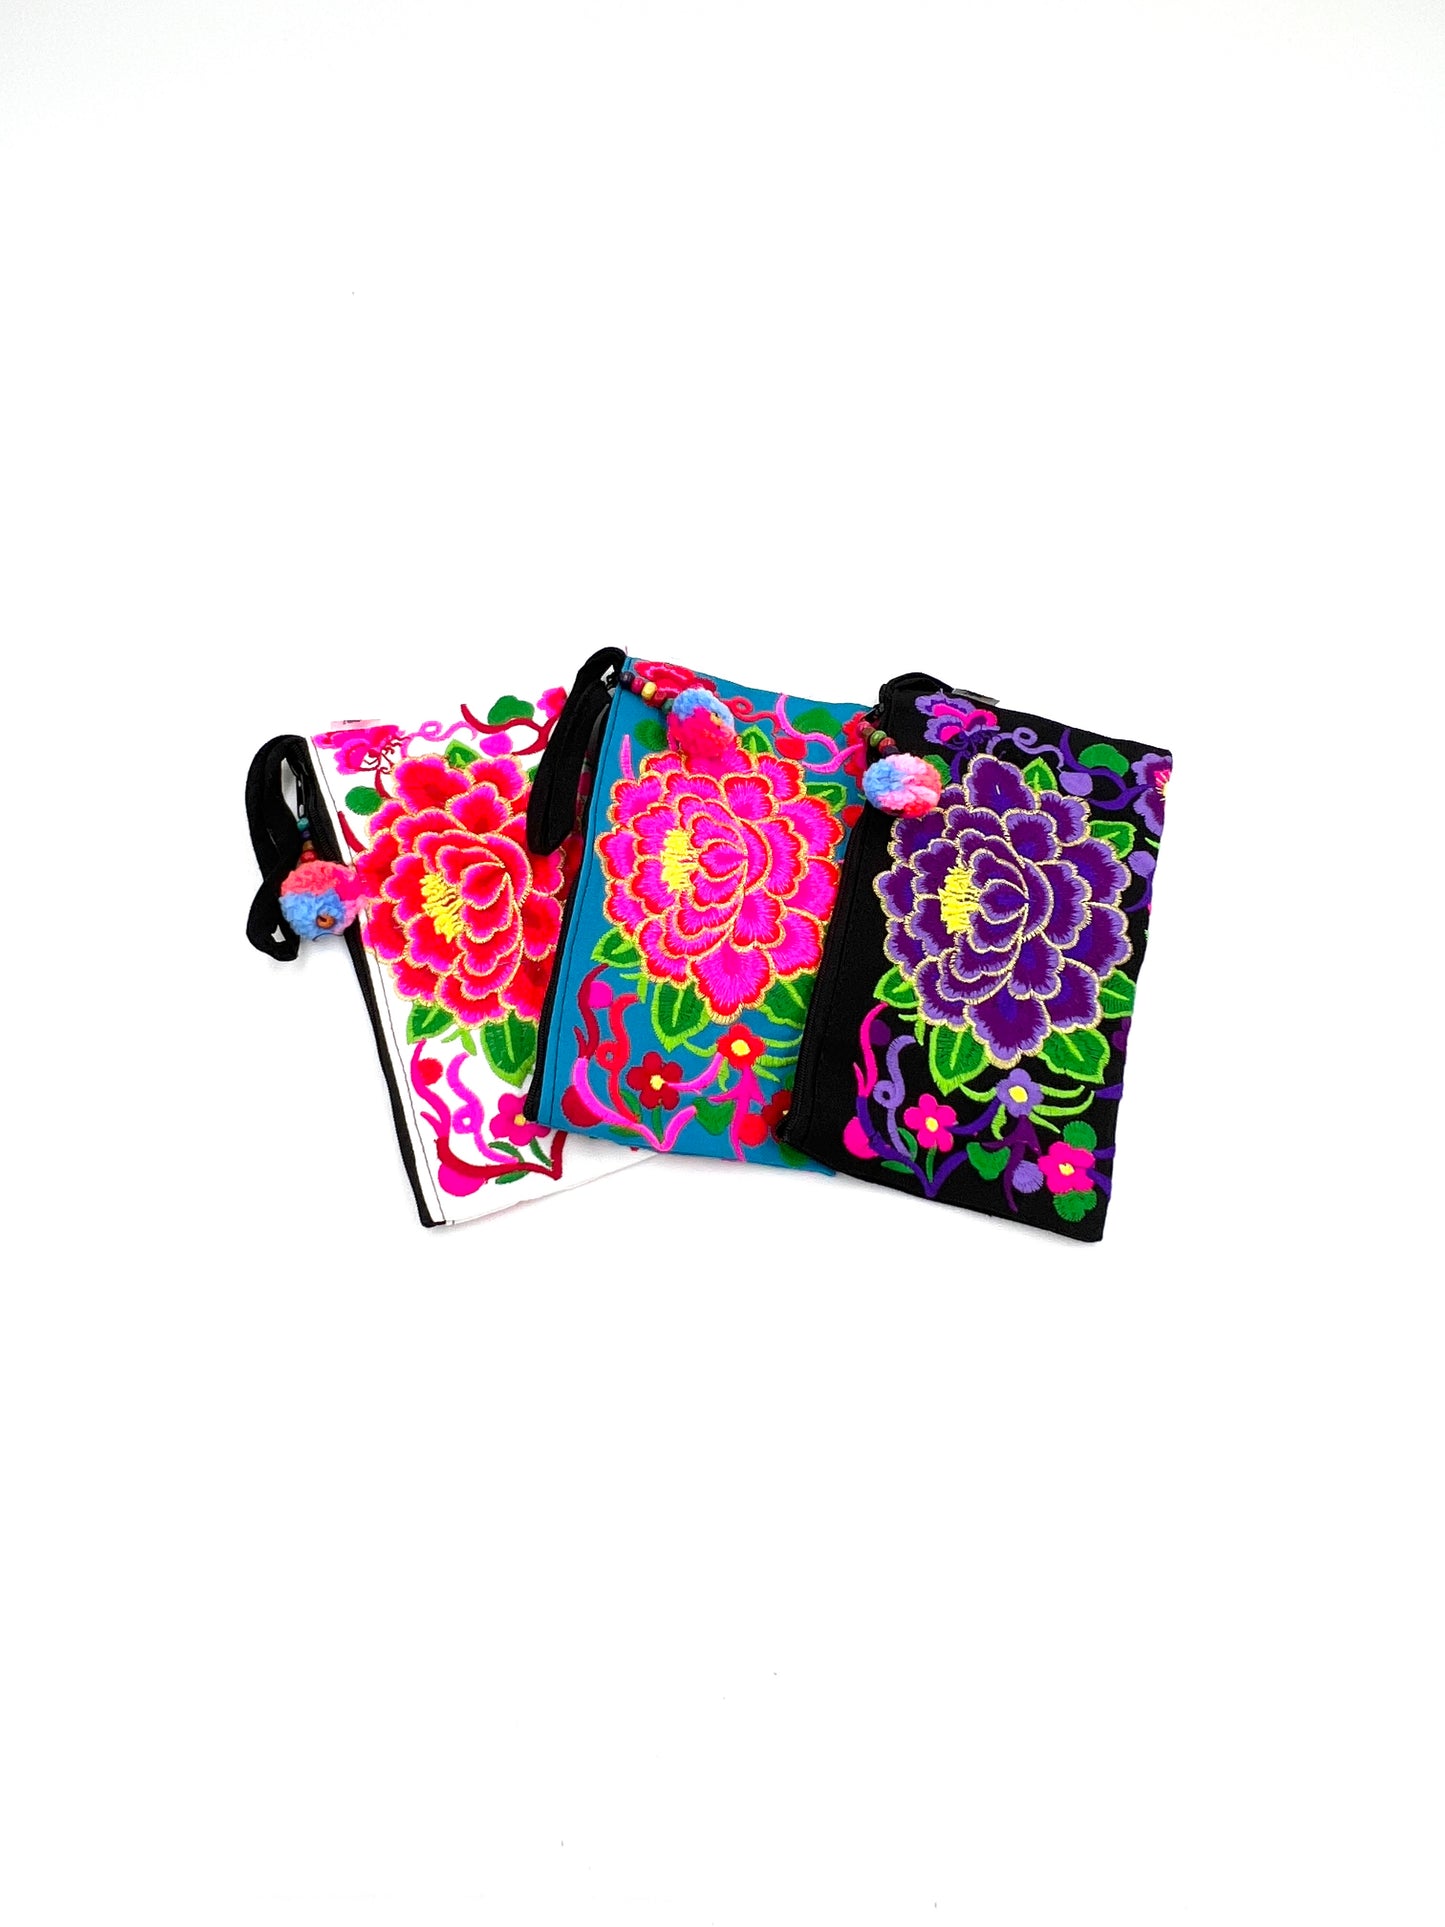 Embroidered Lotus Flower Coin Bags